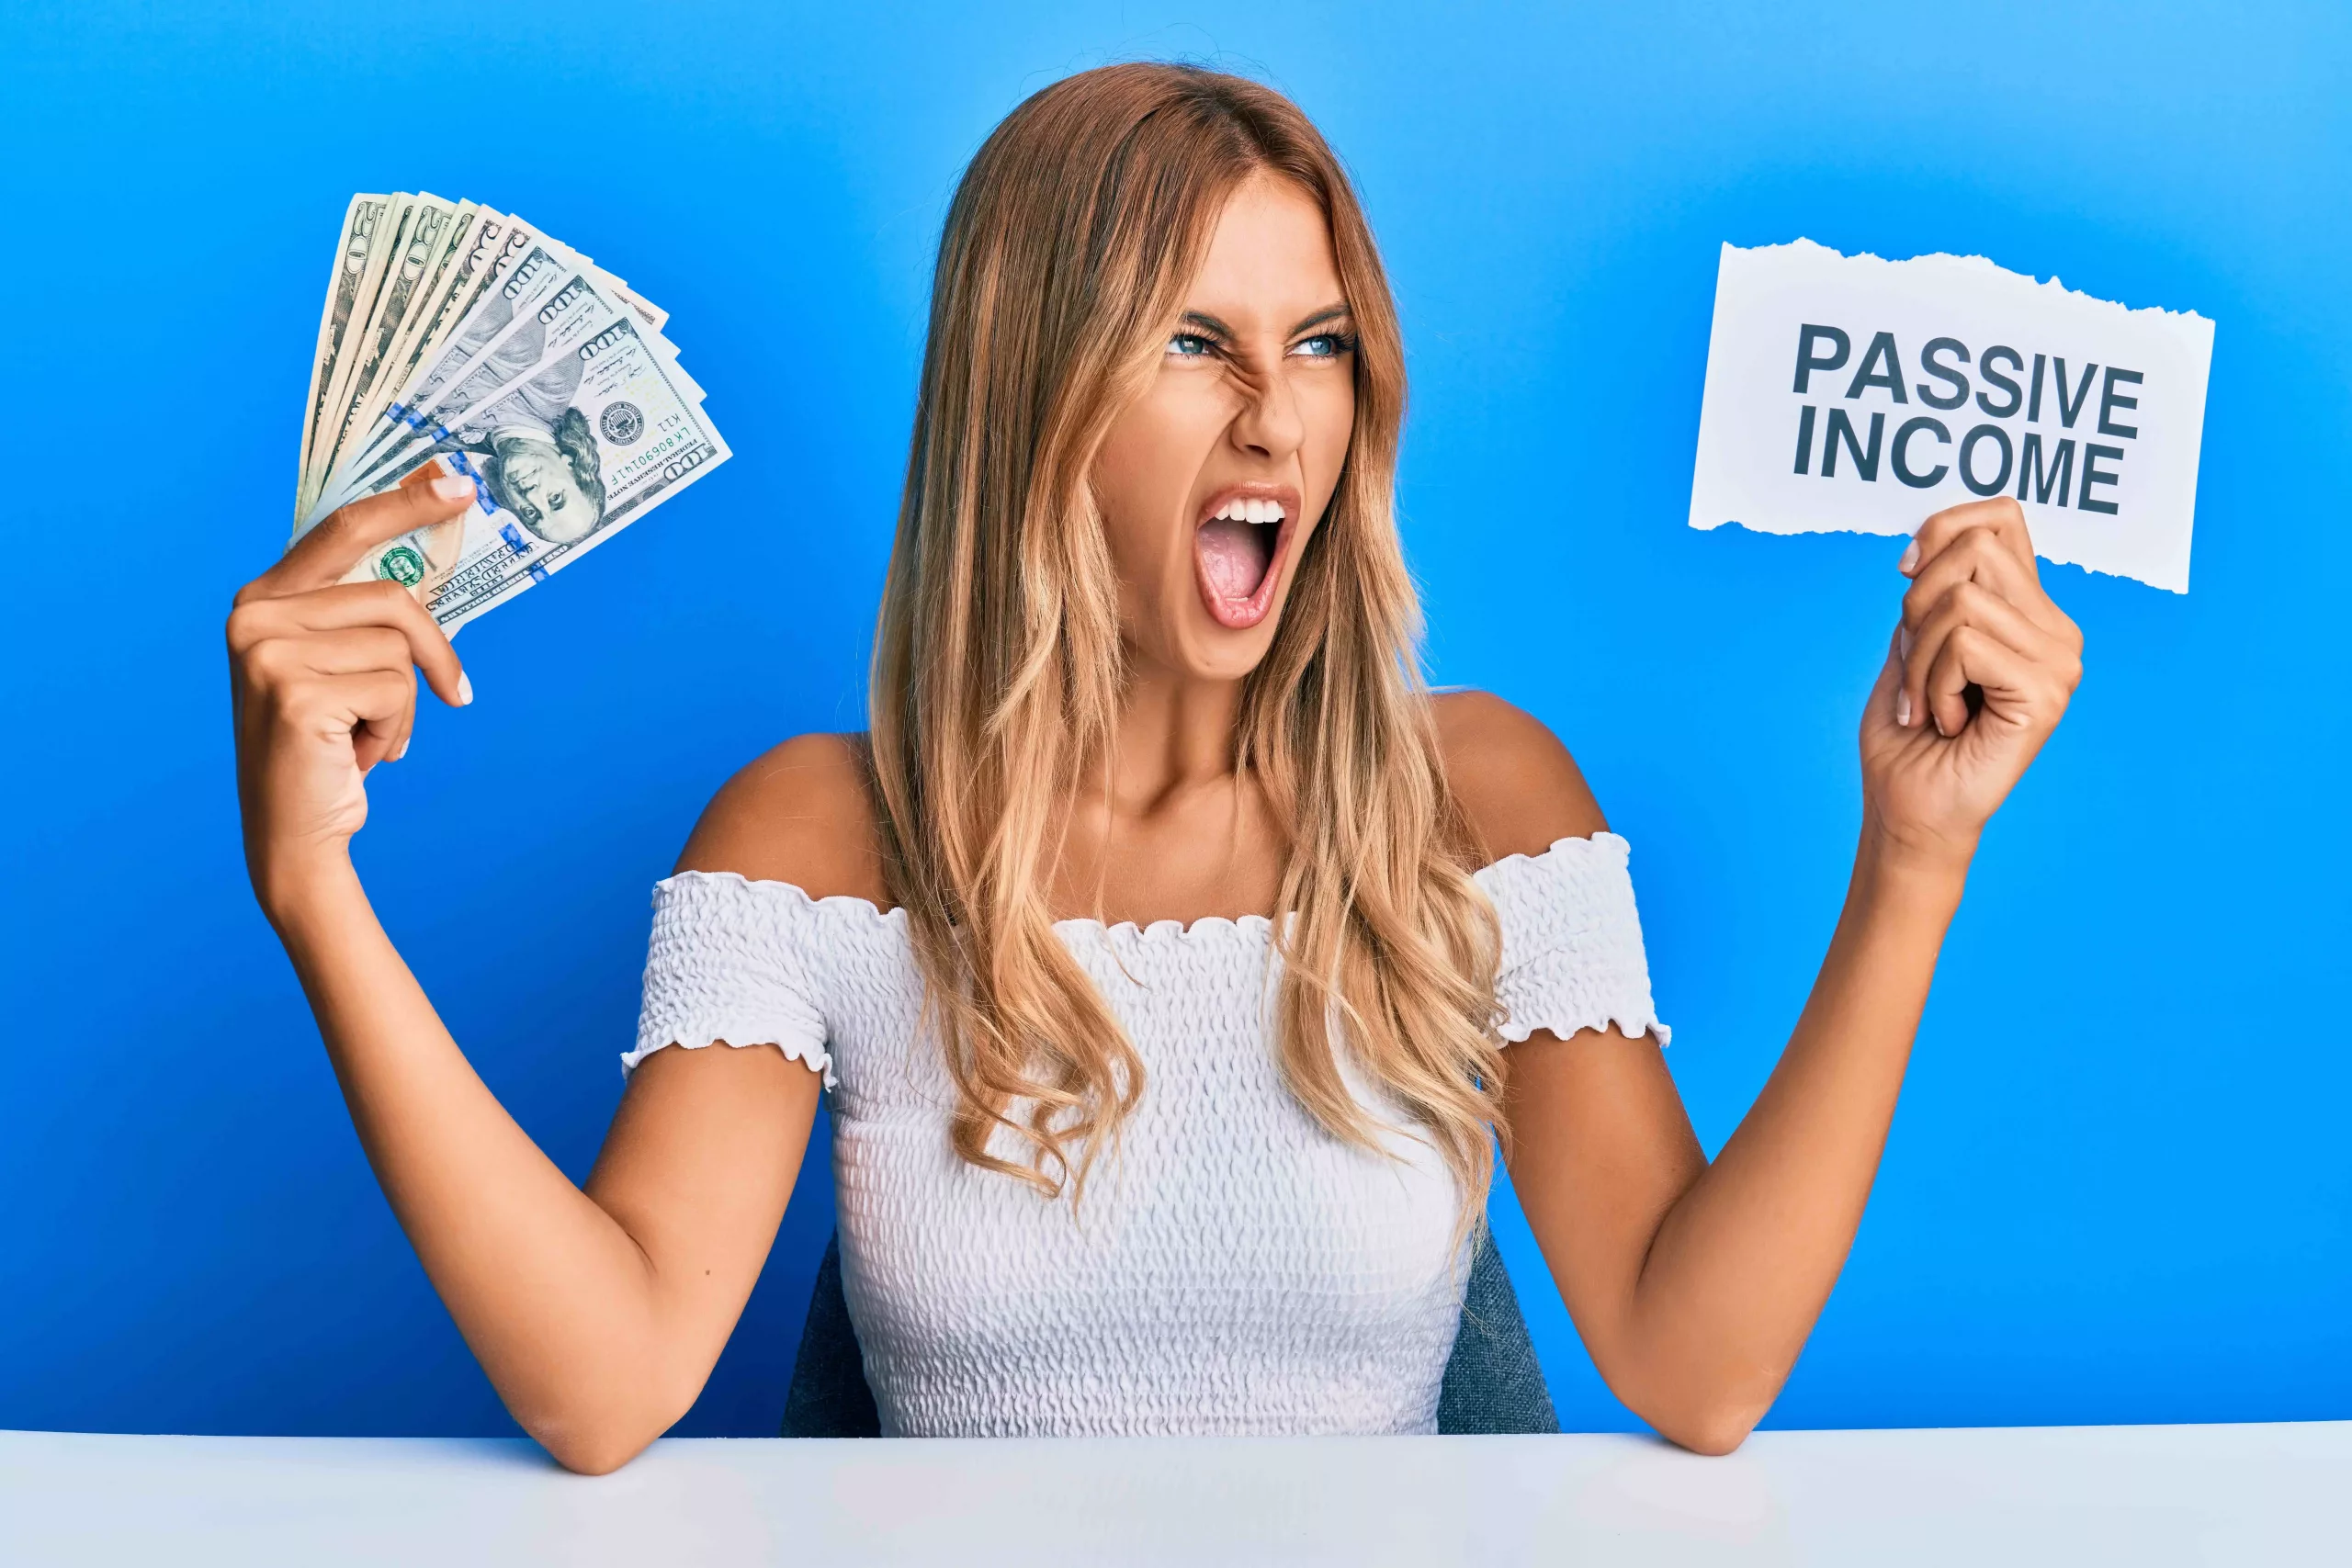 Passive Income - Woman Holding Money and Passive Income Sign